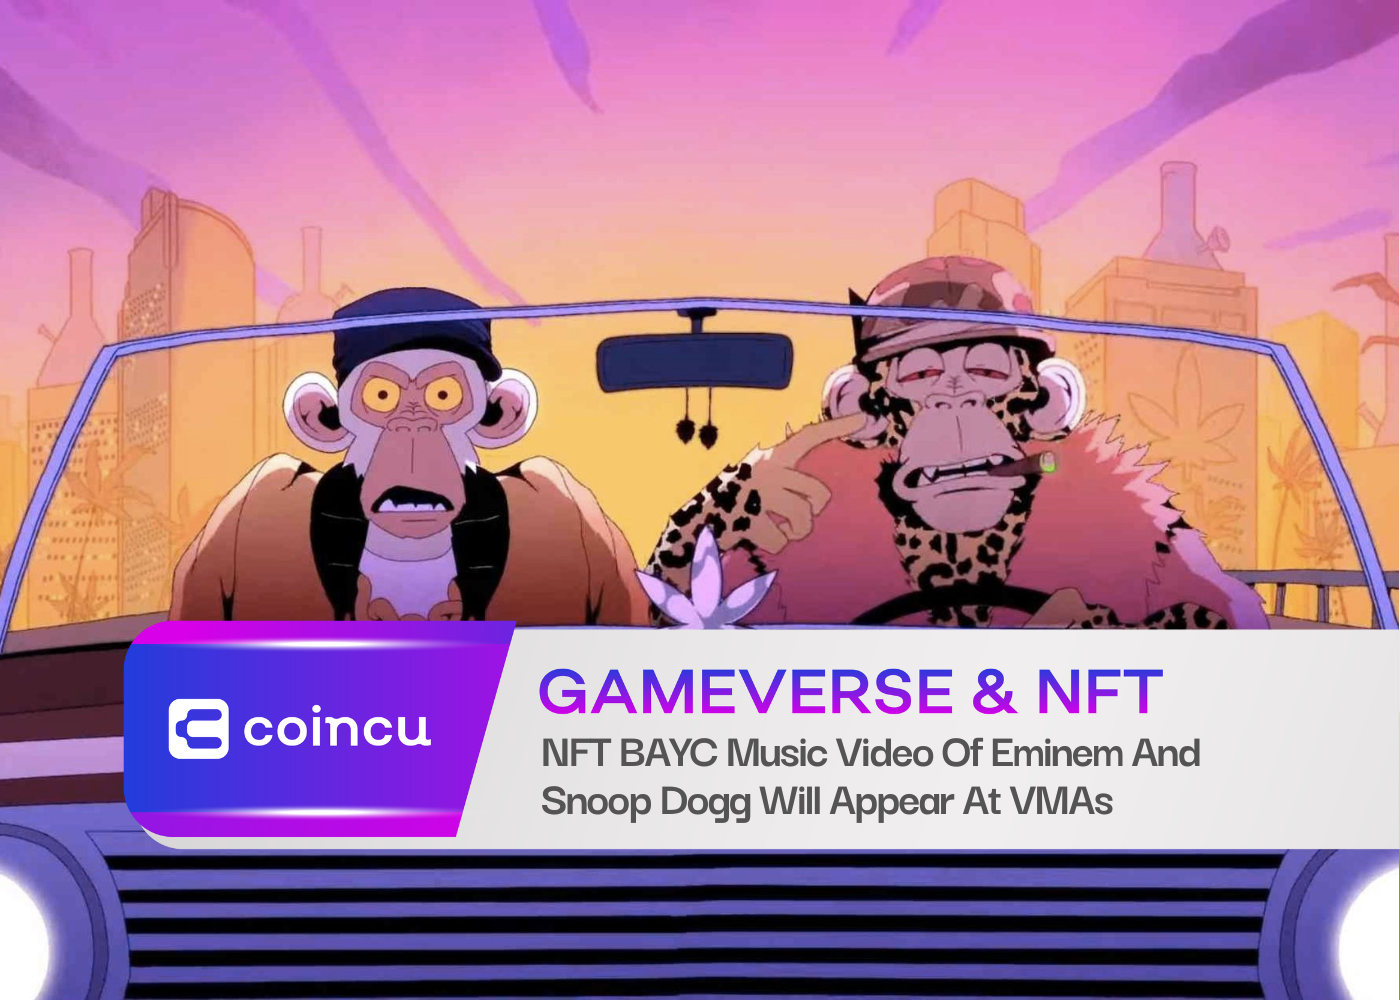 NFT BAYC Music Video Of Eminem And Snoop Dogg Will Appear At VMAs